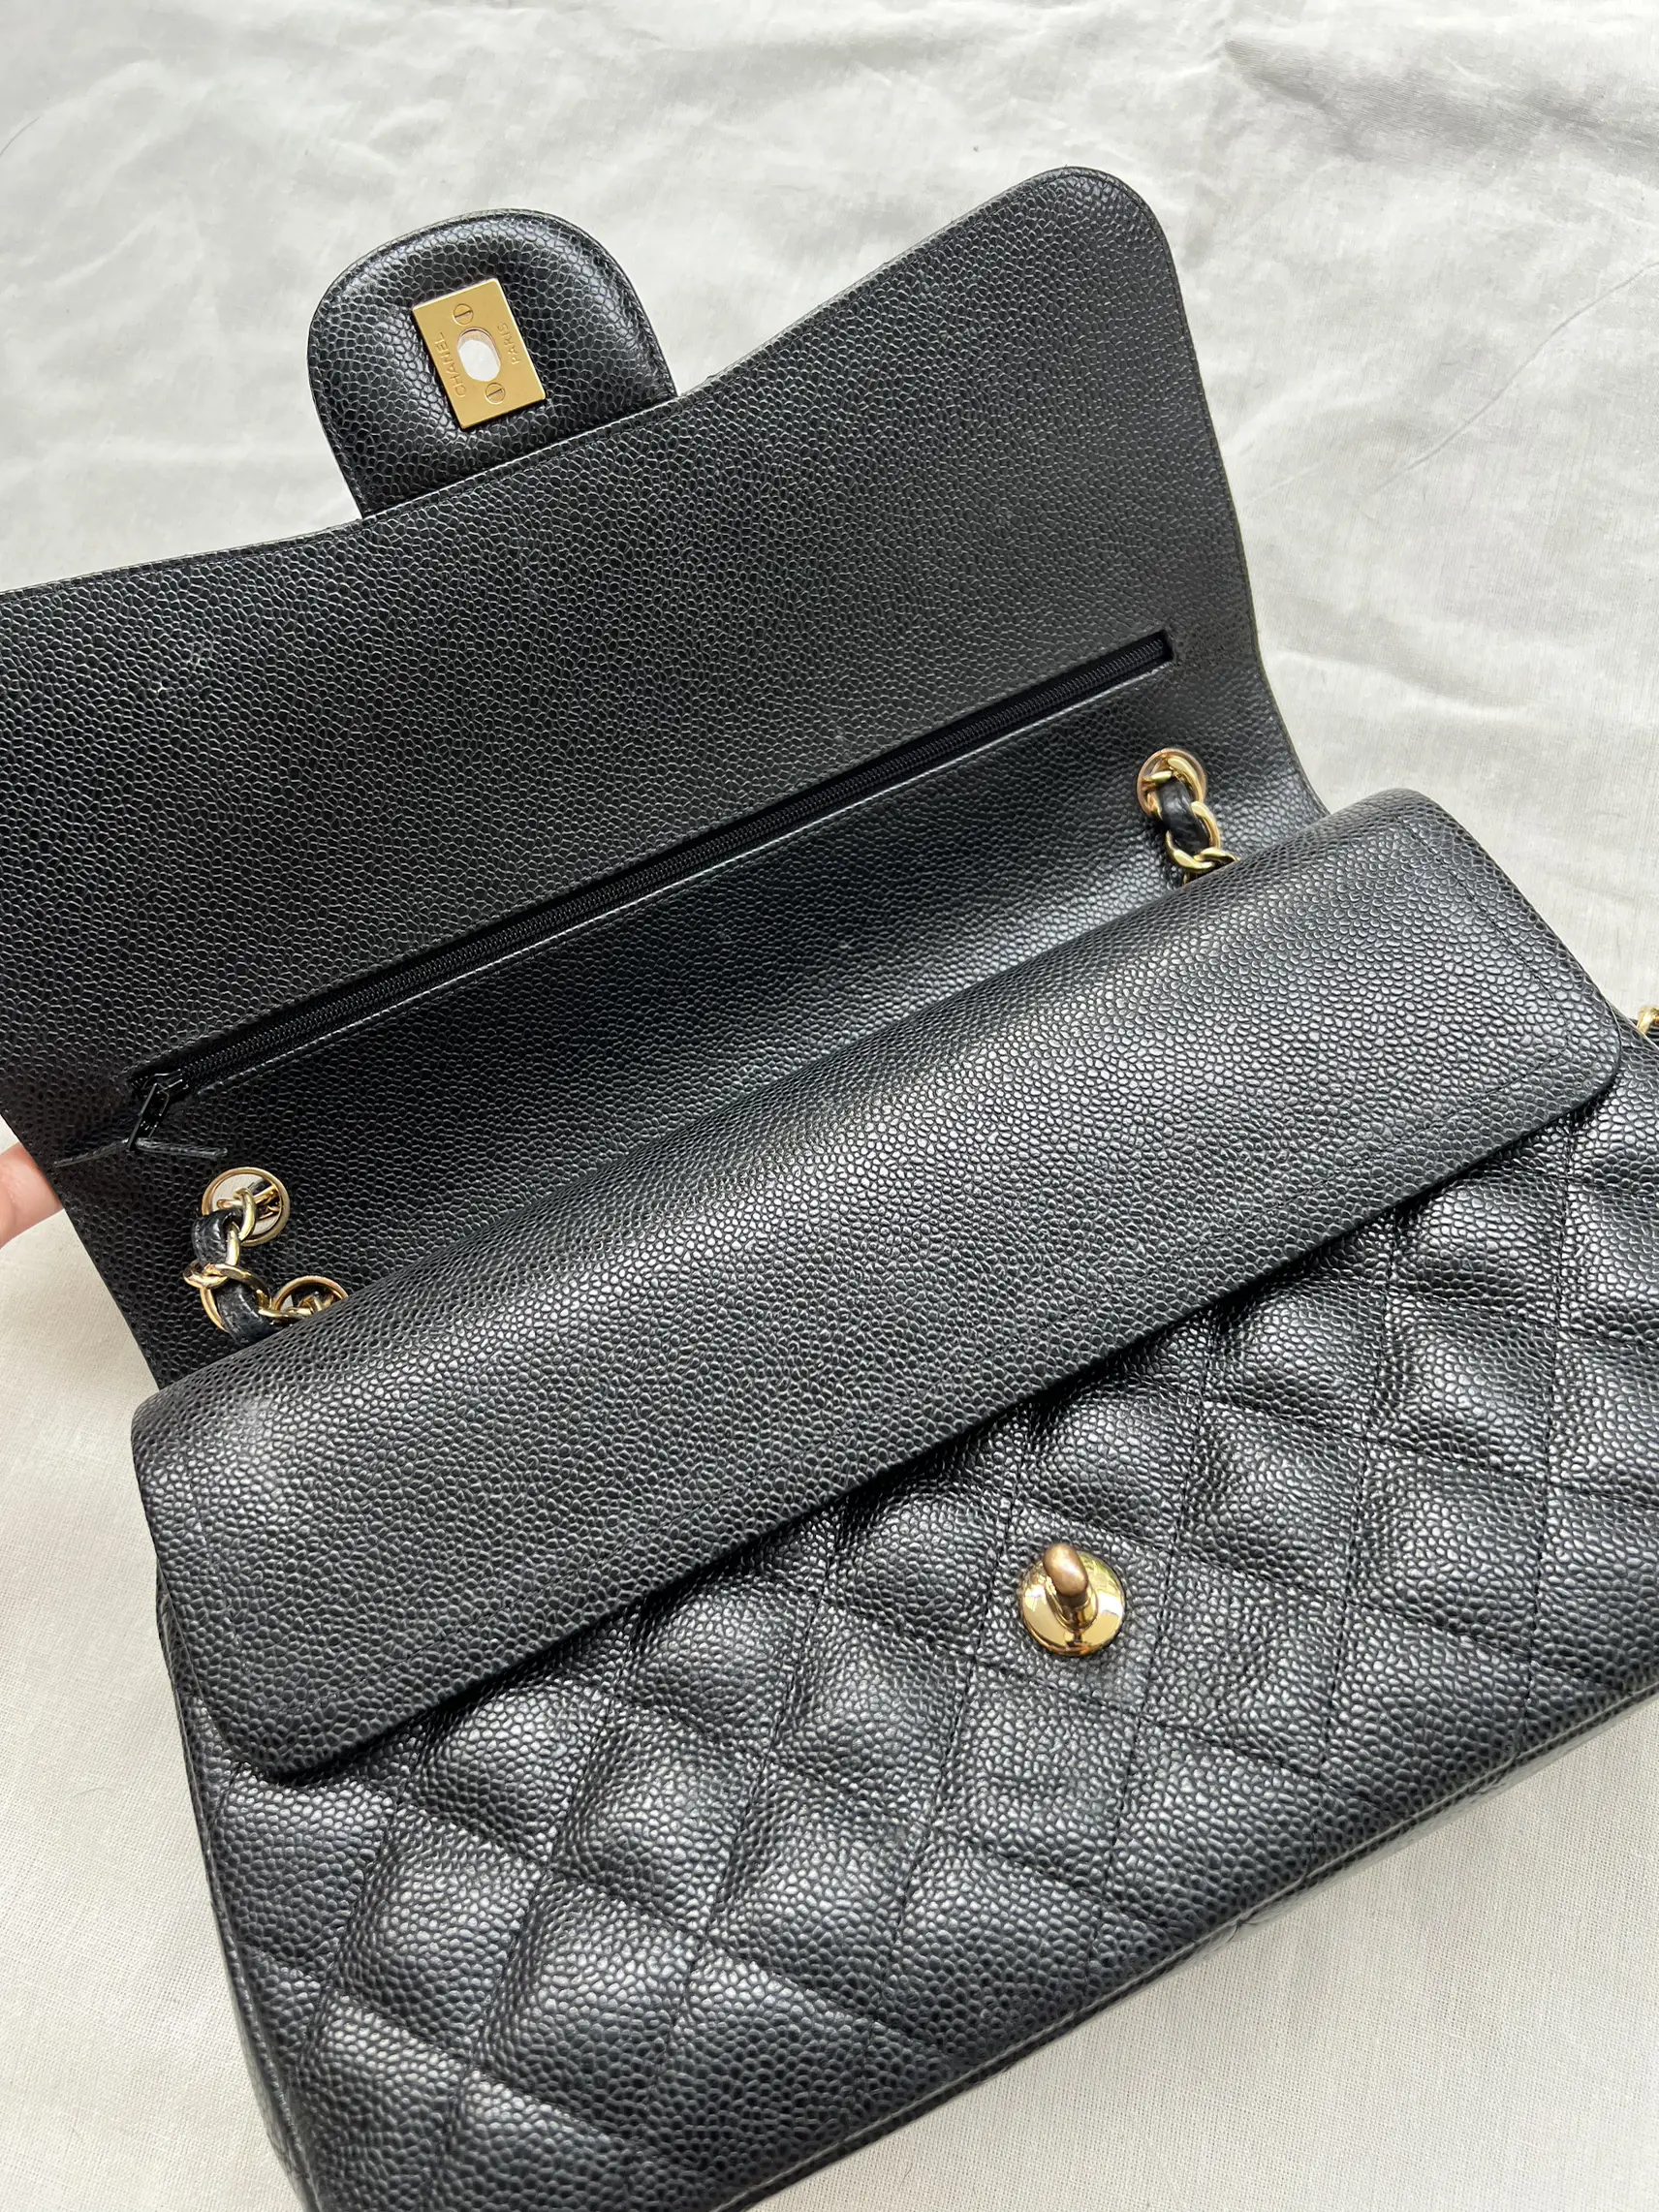 Rare Vintage Chanel Bags & Accessories @ 10% off, Gallery posted by  etherealgift